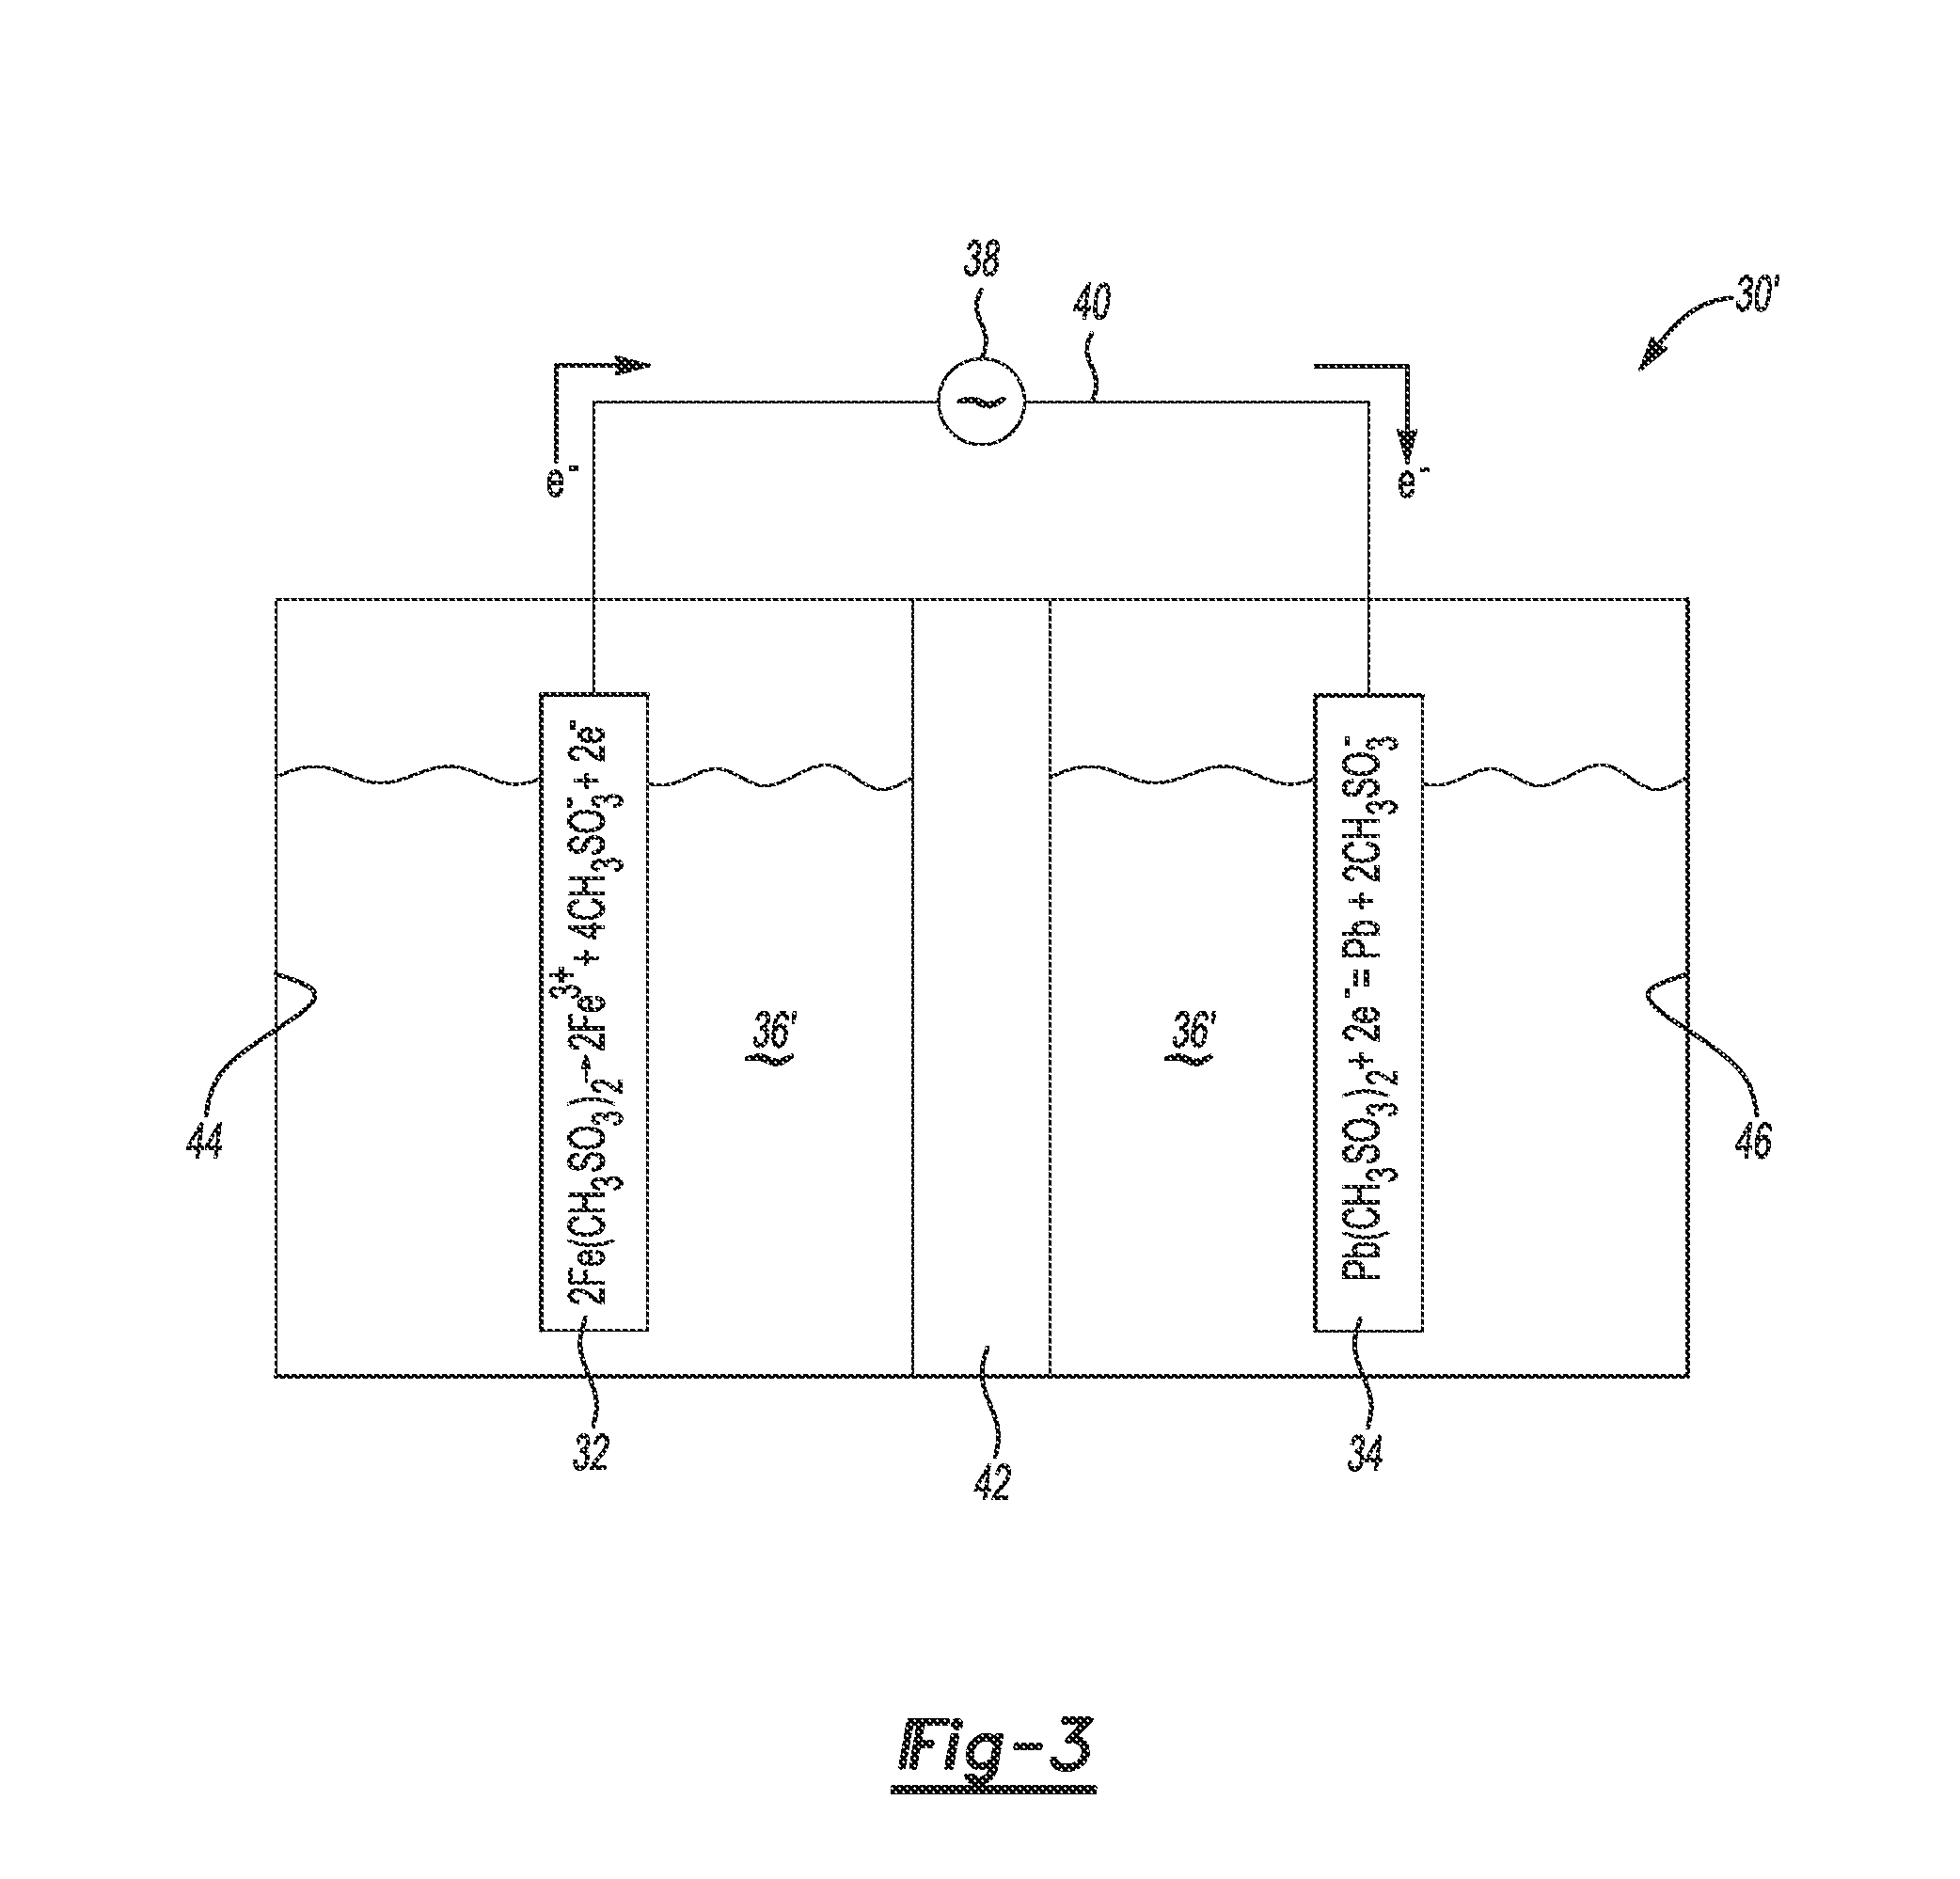 Recovering lead from a lead material including lead sulfide